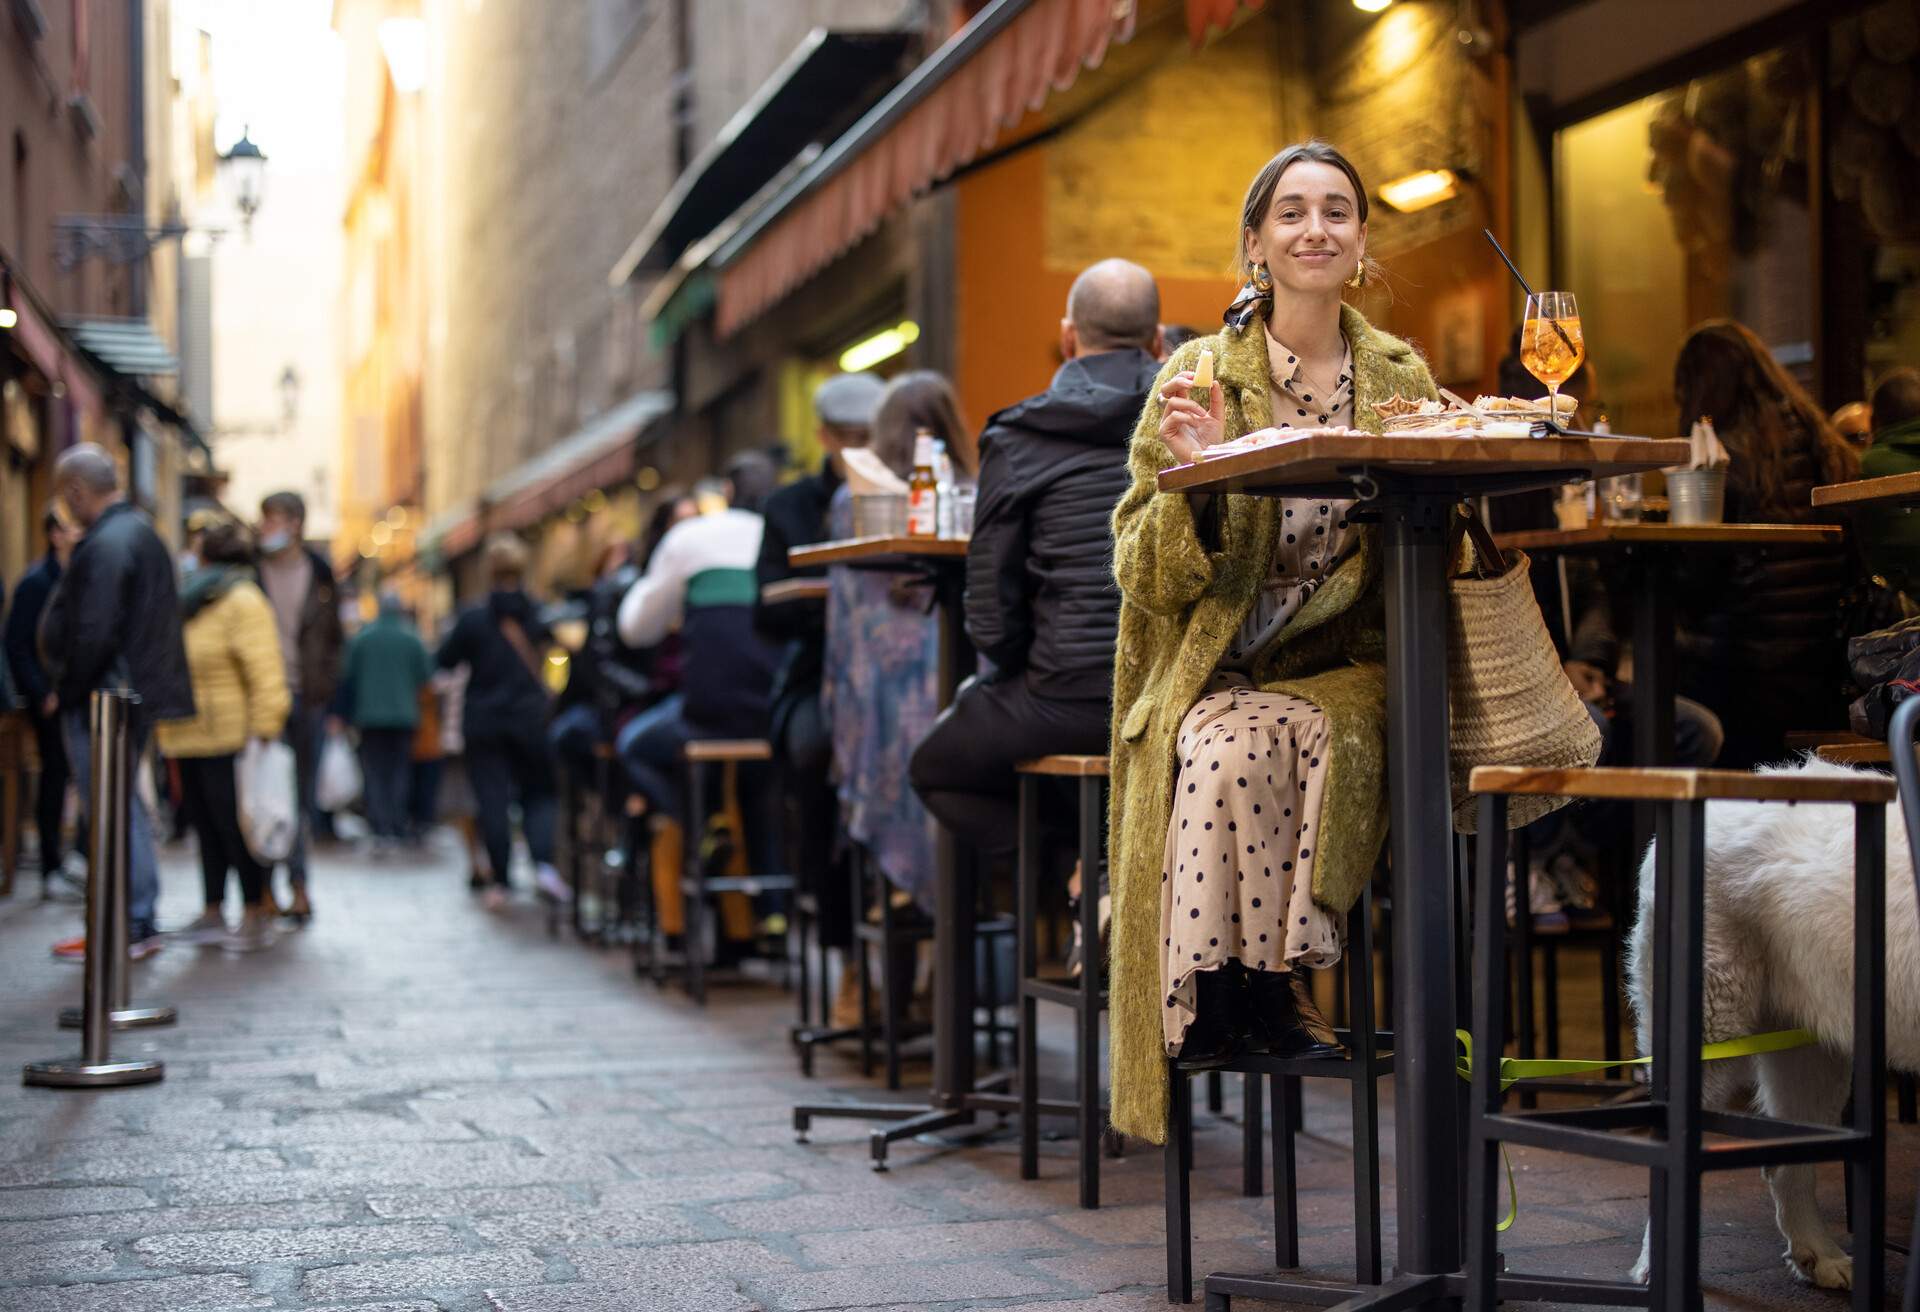 DEST_ITALY_BOLOGNA_RESTAURANT_BAR_PEOPLE_WOMAN_GettyImages-1391071022